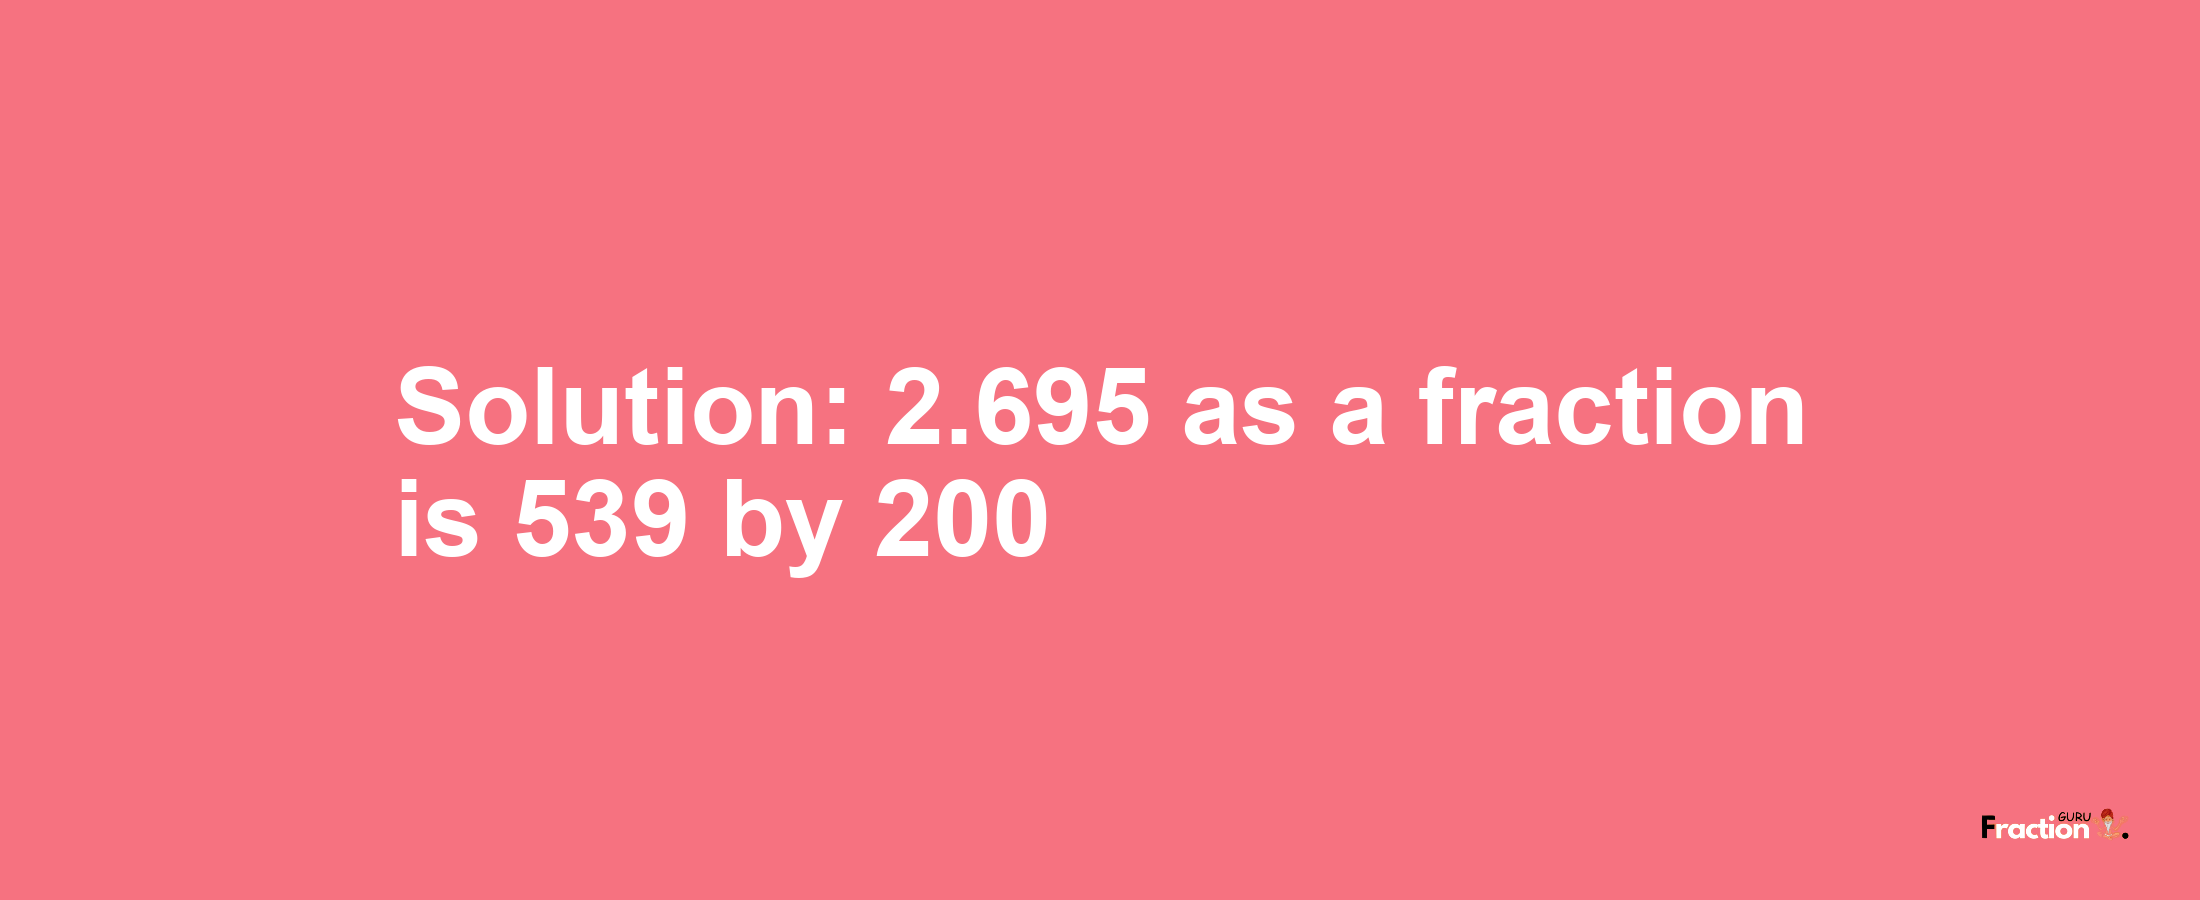 Solution:2.695 as a fraction is 539/200